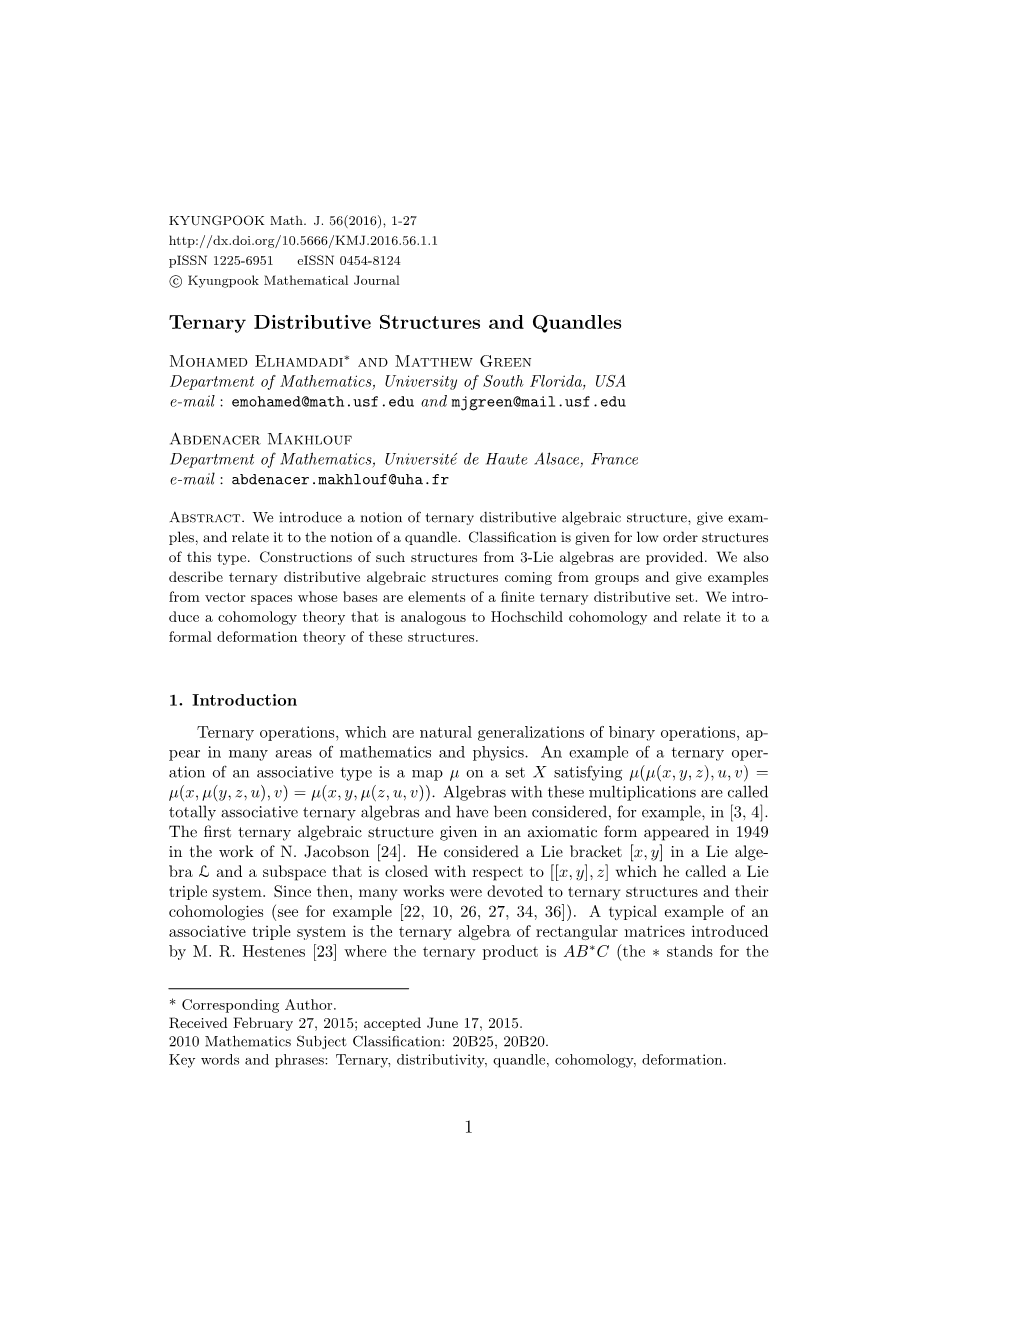 Ternary Distributive Structures and Quandles